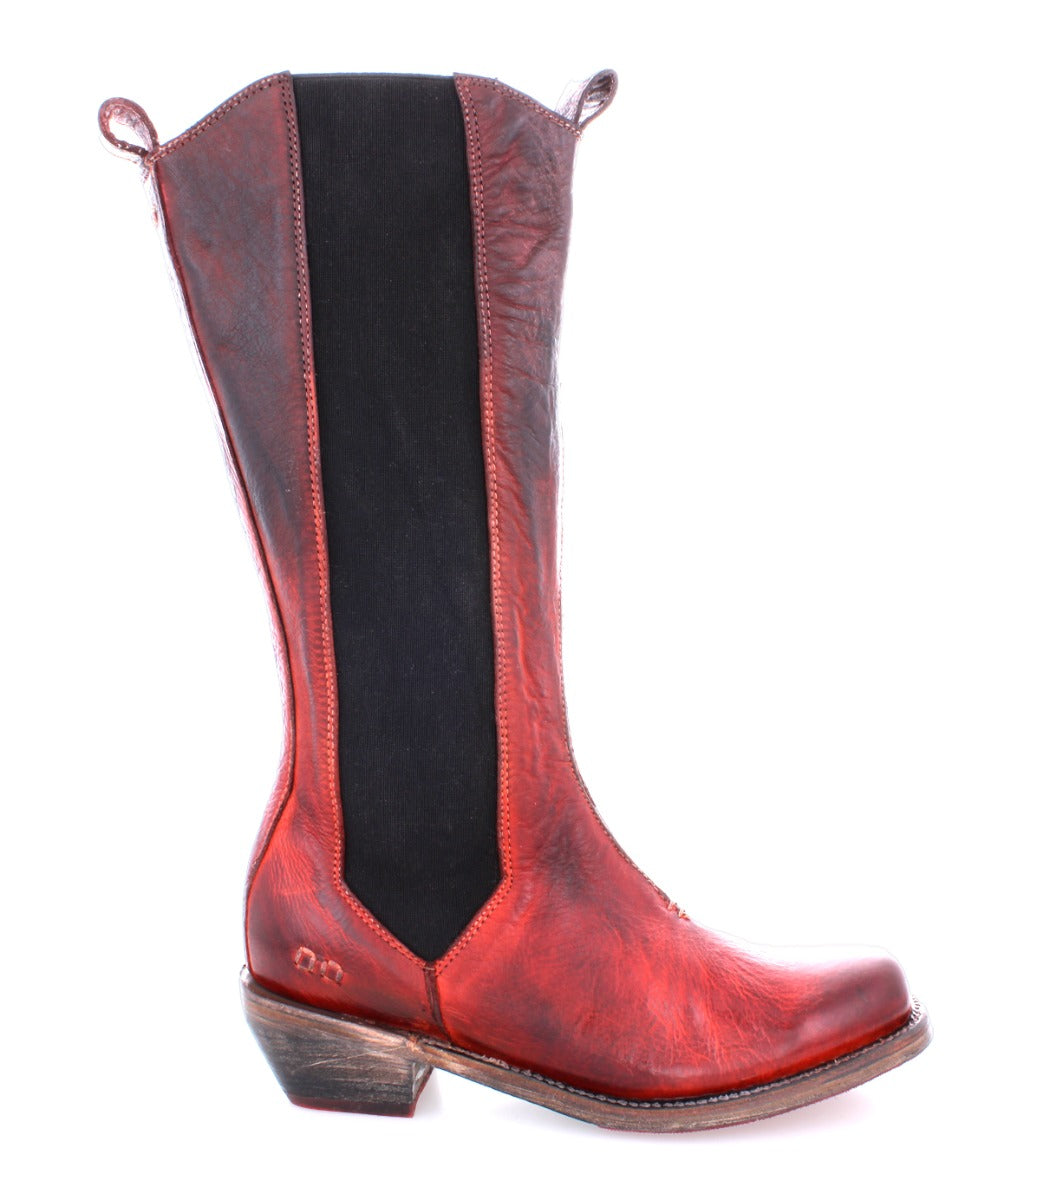 A women's Clarisse red leather boot with a black sole by Bed Stu.